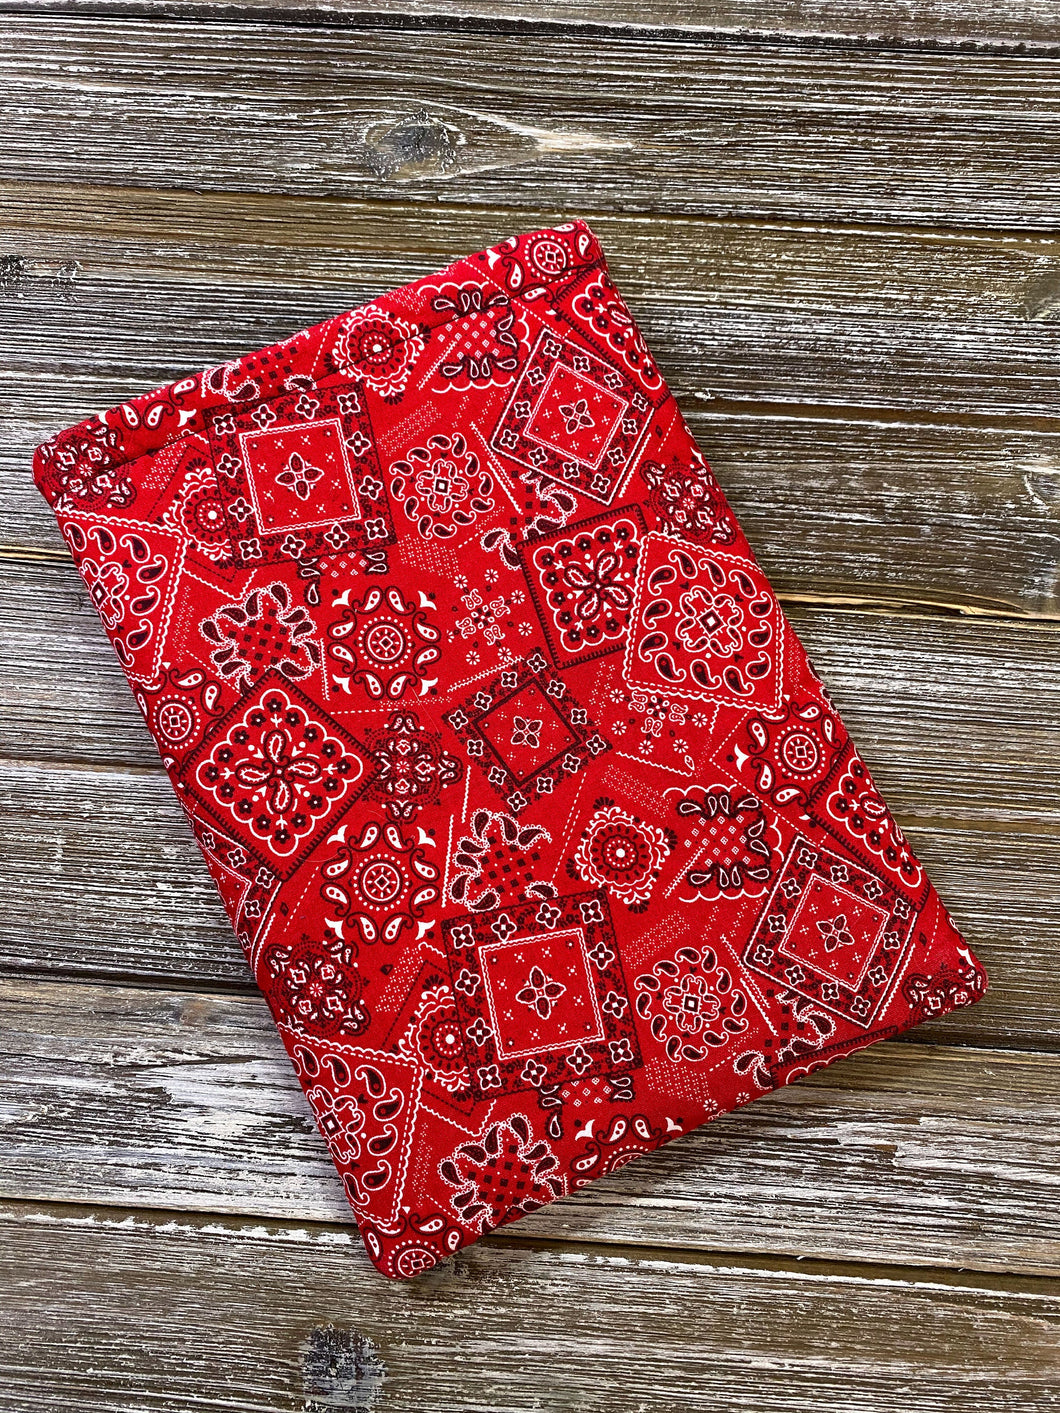 Paisley Patchwork Bandana Red Black Padded Book Sleeve | Kindle Accessory Book Pocket | Protective Book Bag | Book Pouch | Bookish Nerd Gift